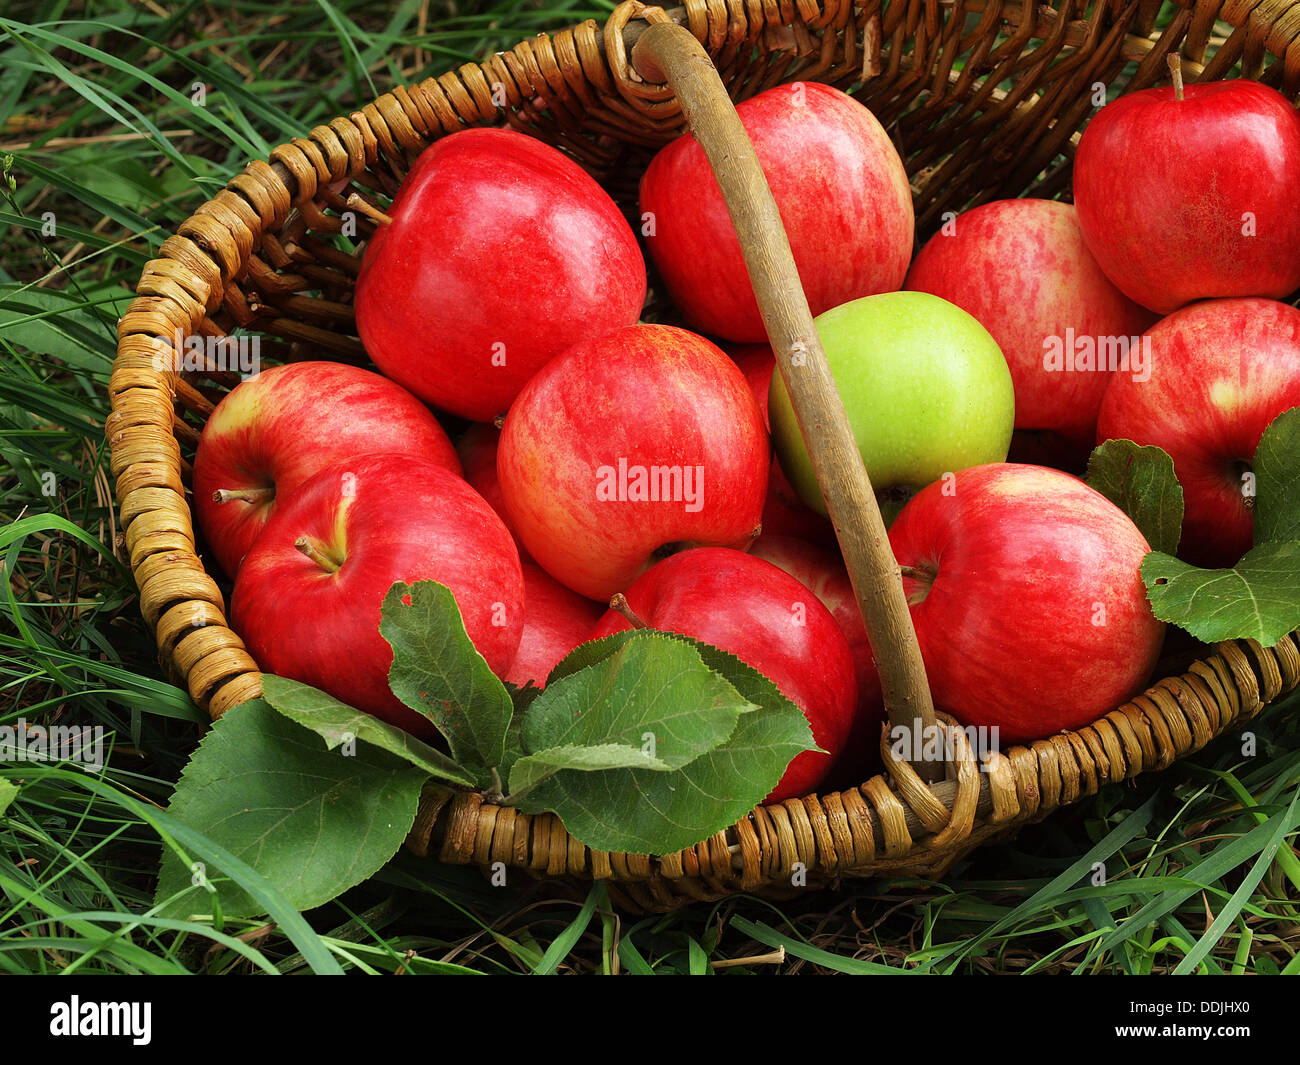 Fresh apples in the basket Stock Photo